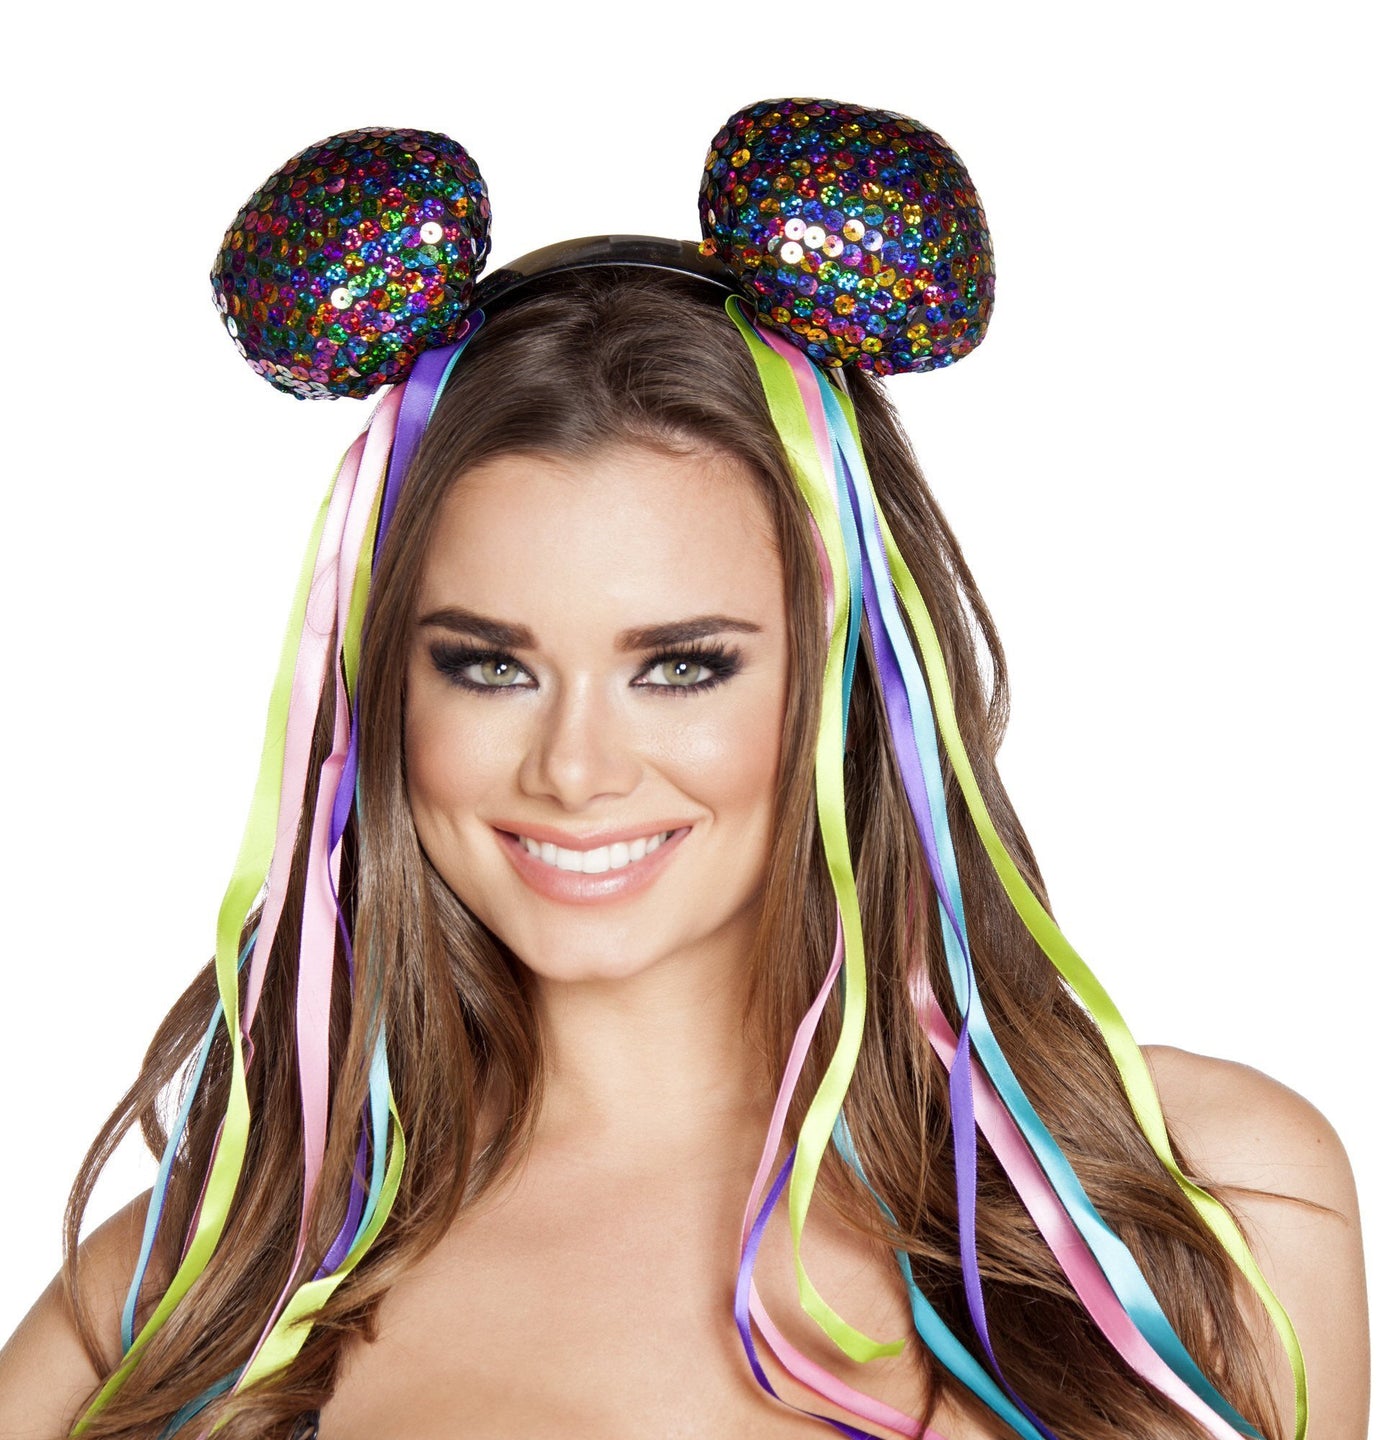 Buy Multi color Sequin Head Piece from RomaRetailShop for  with Same Day Shipping Designed by Roma Costume, Inc.